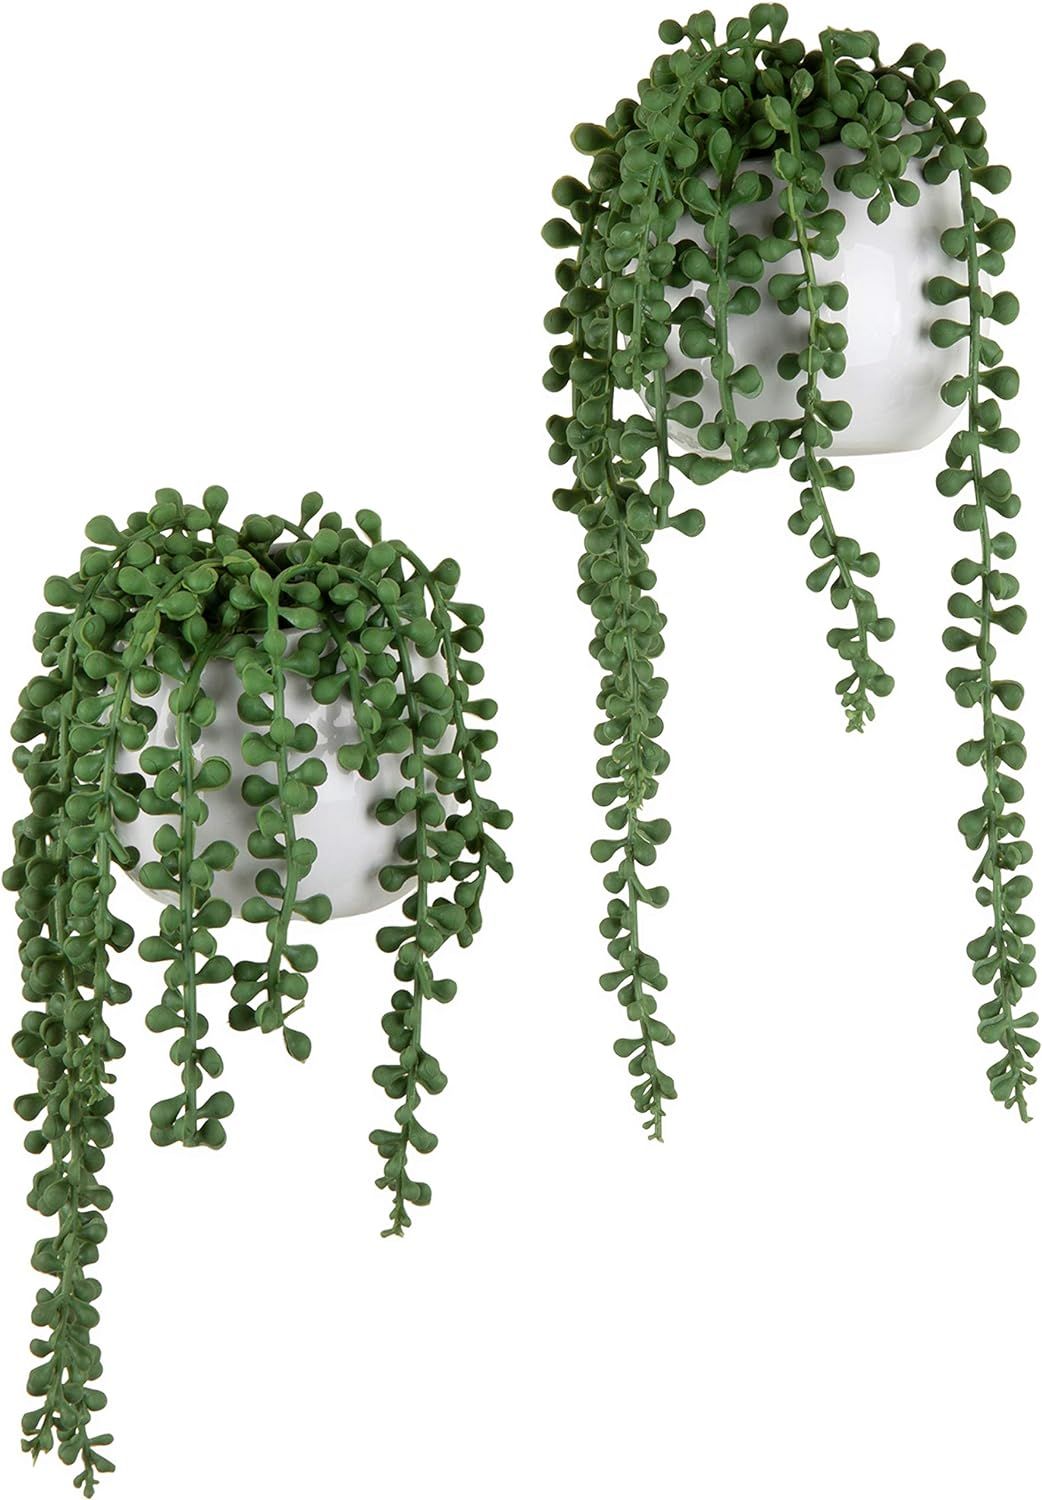 MyGift Artificial String of Pearls Plants in White Ceramic Wall-Hanging Planters, Set of 2 | Amazon (US)